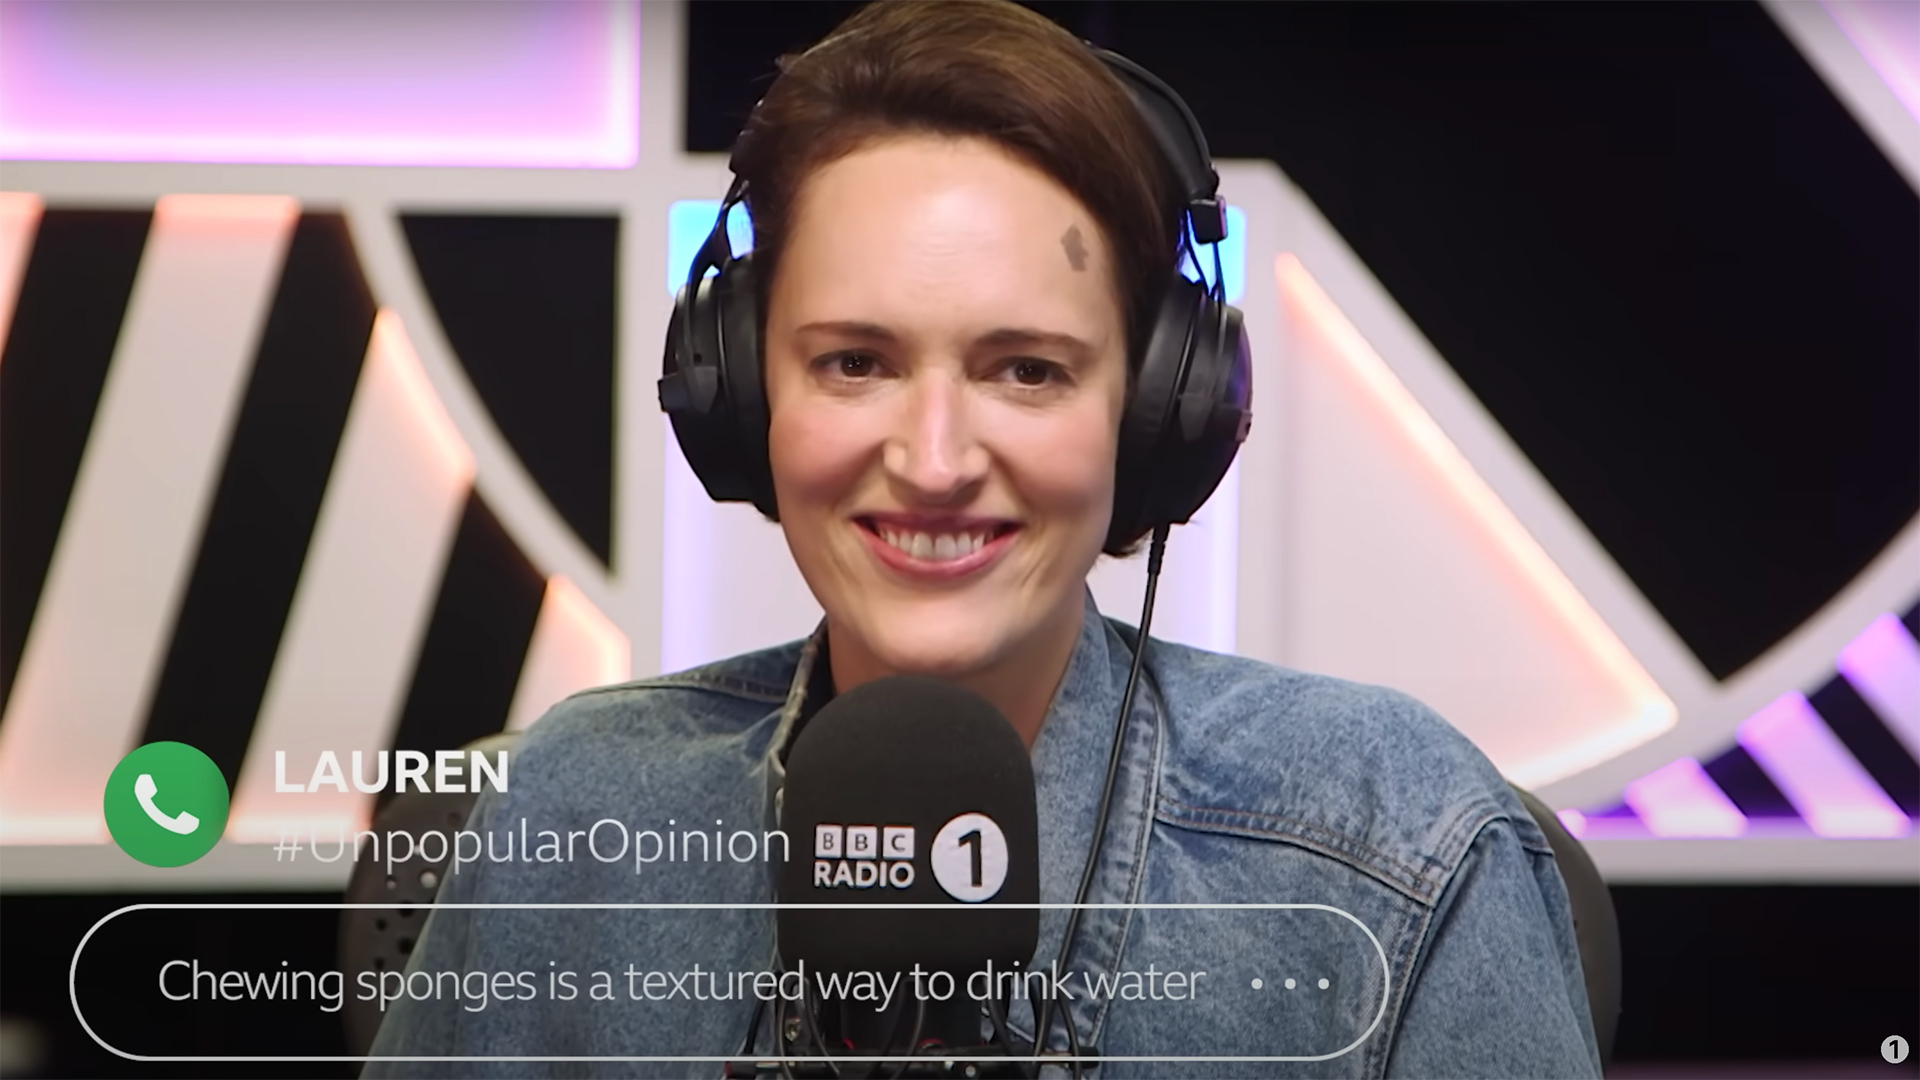 A woman sitting on a radio show wears headphones and grins.